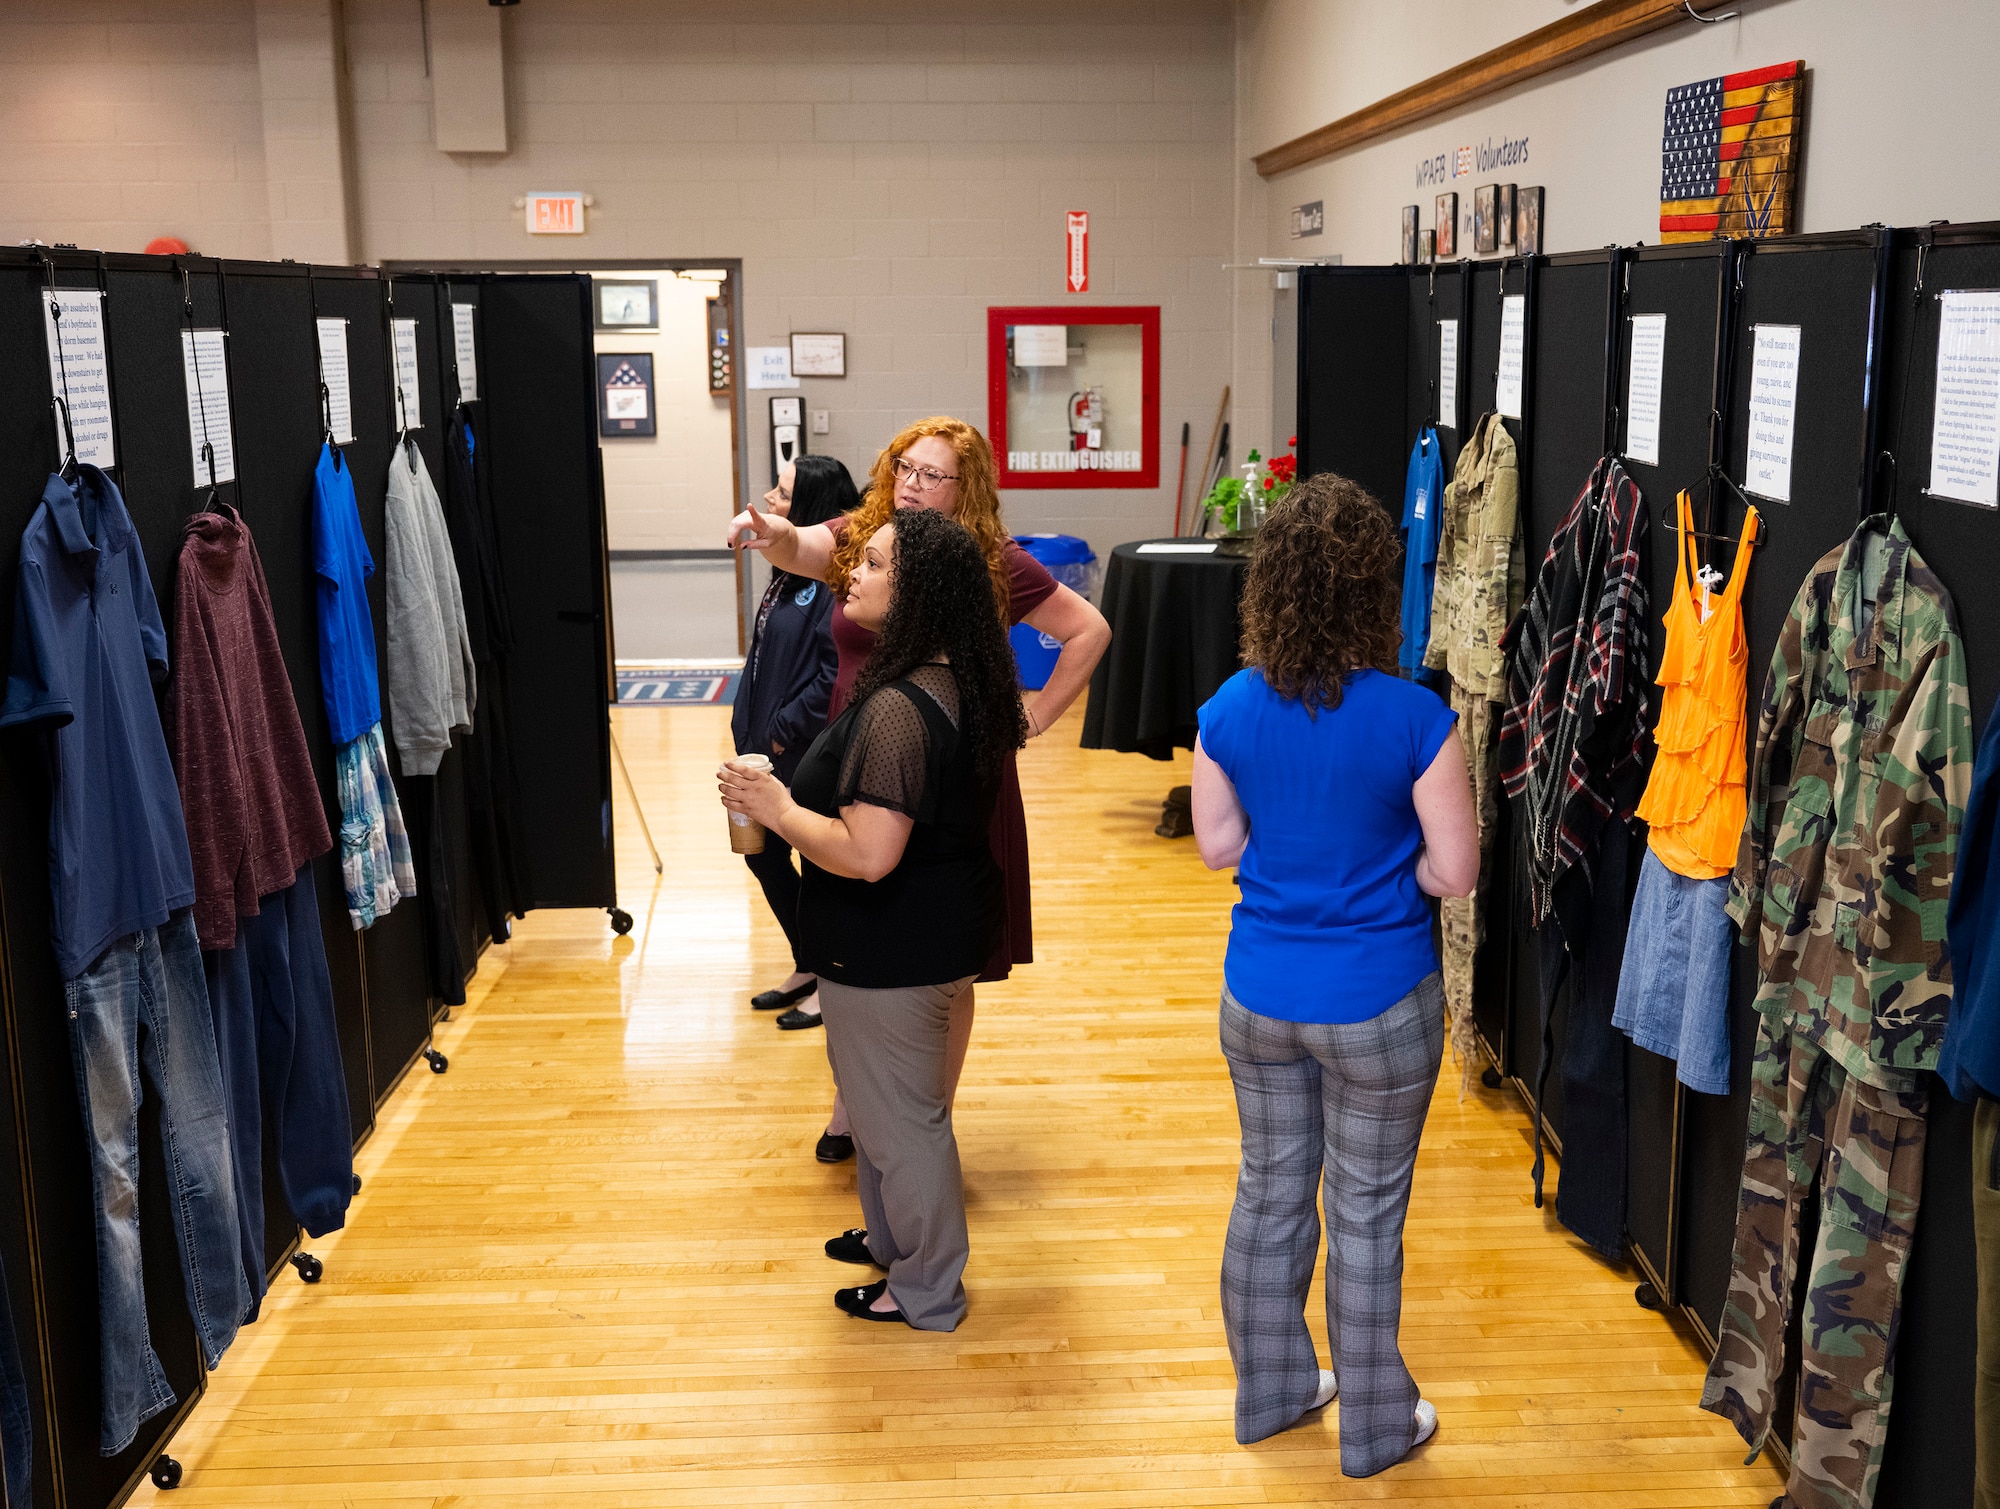 A group of women stand looking at a display of clothing and accounts of sexual assaults.